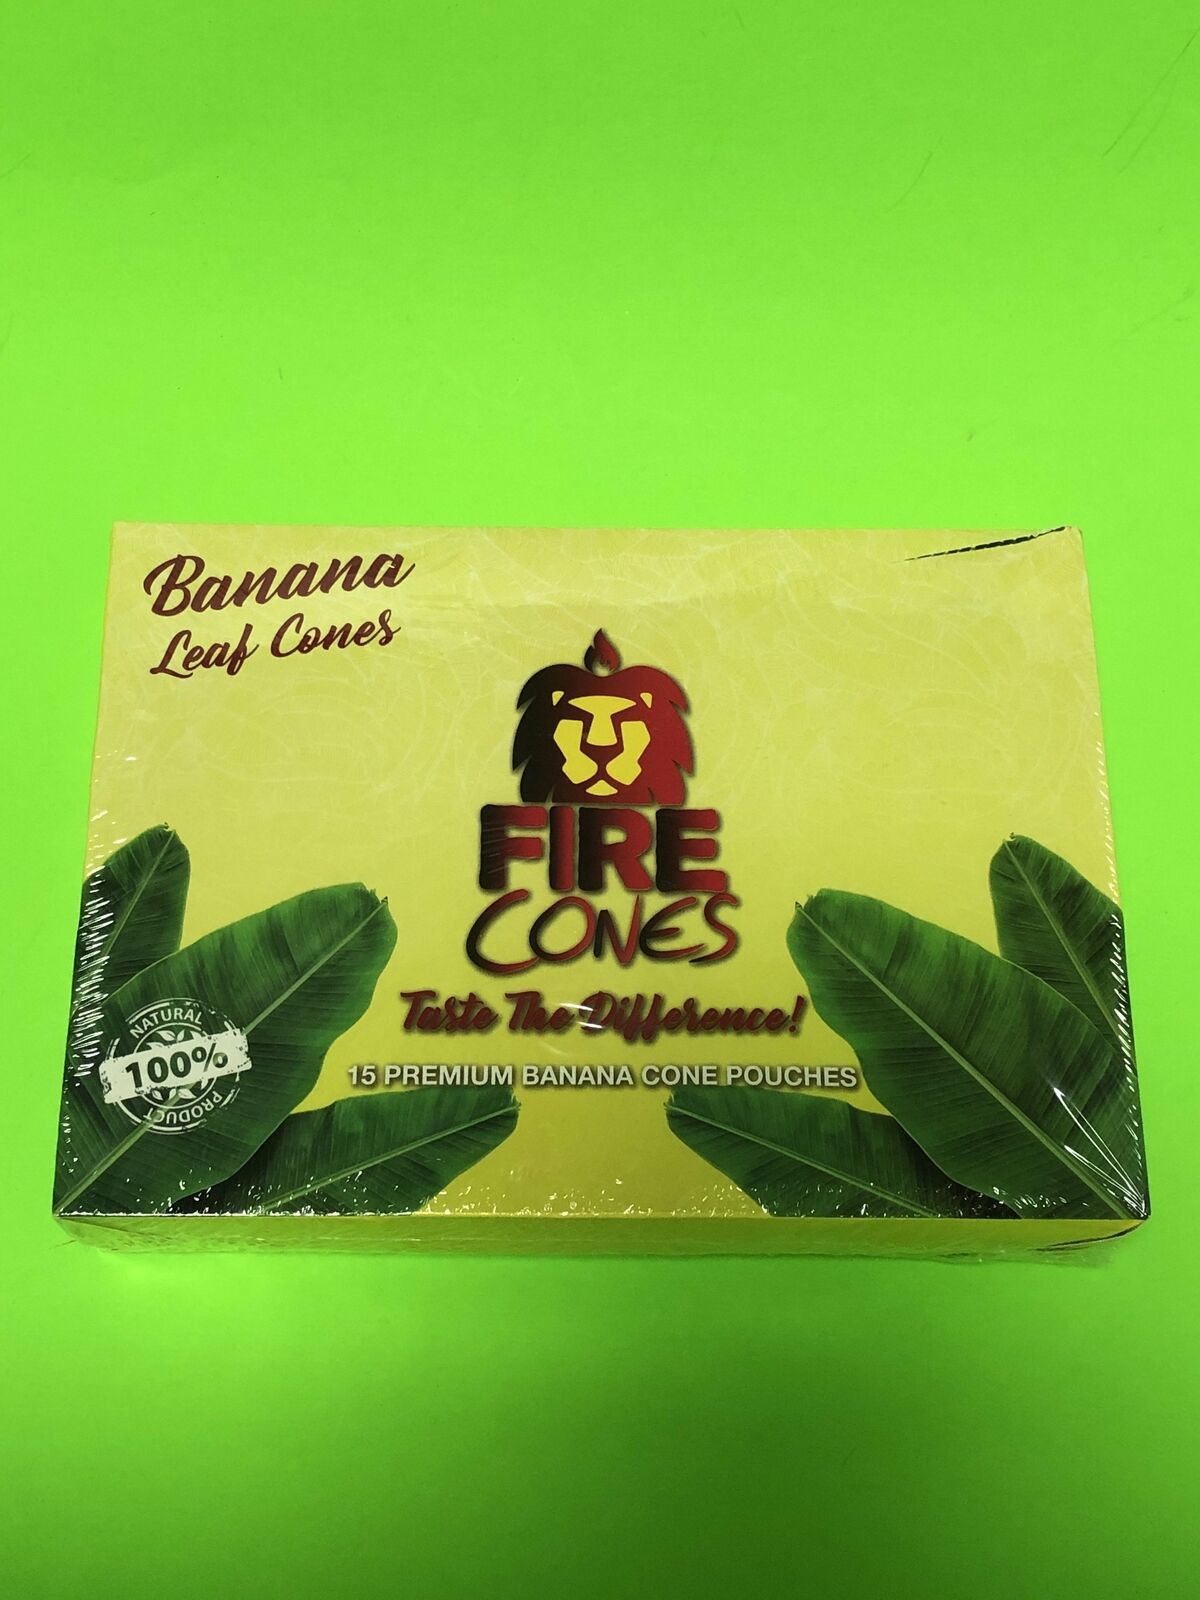 FREE GIFTS🎁Fire🔥Cones🌀15 High Quality Natural Banana🍌Leaf🍃Cone Pouches🔥💨♨